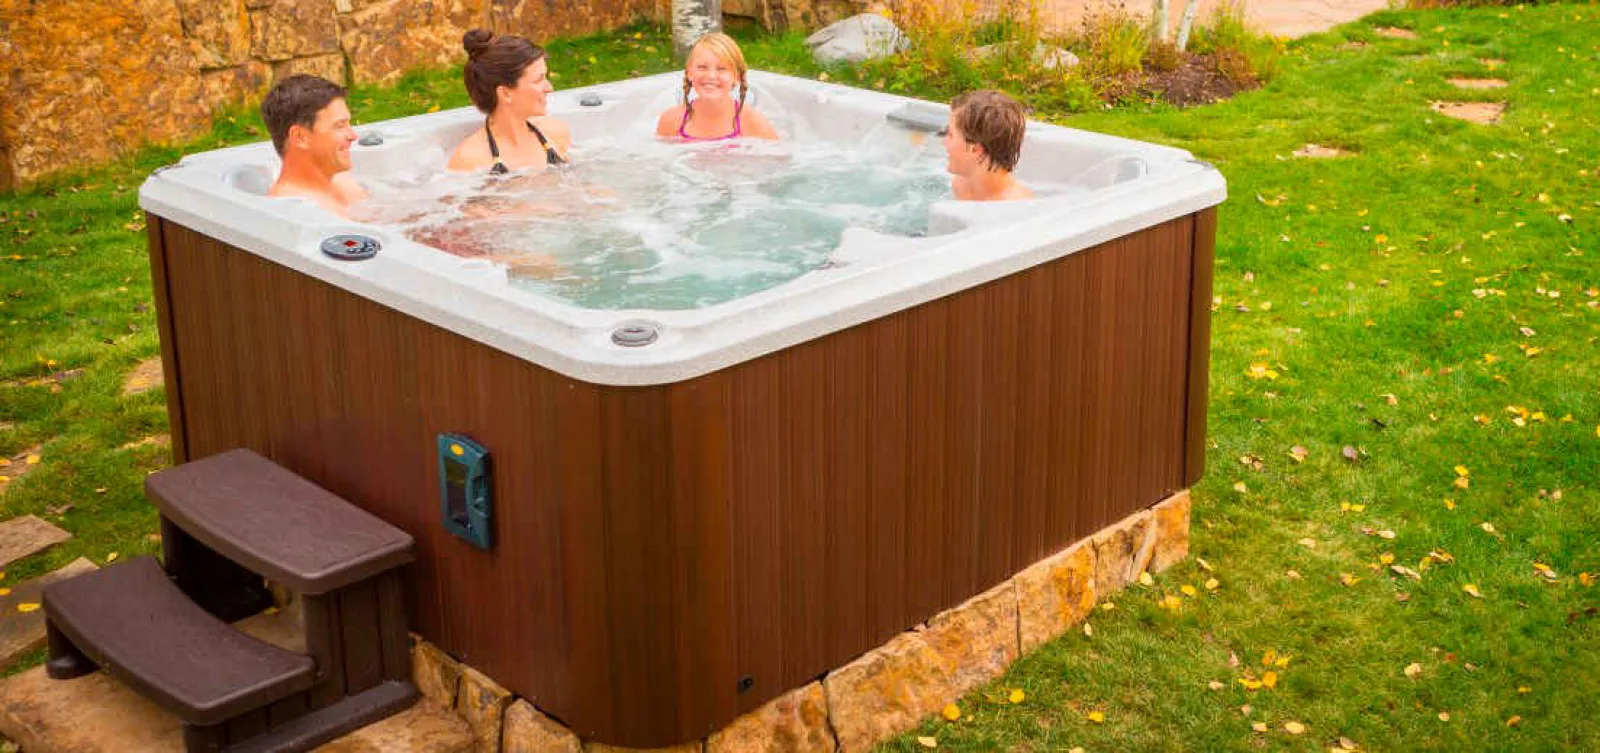 a large outdoor hot tub